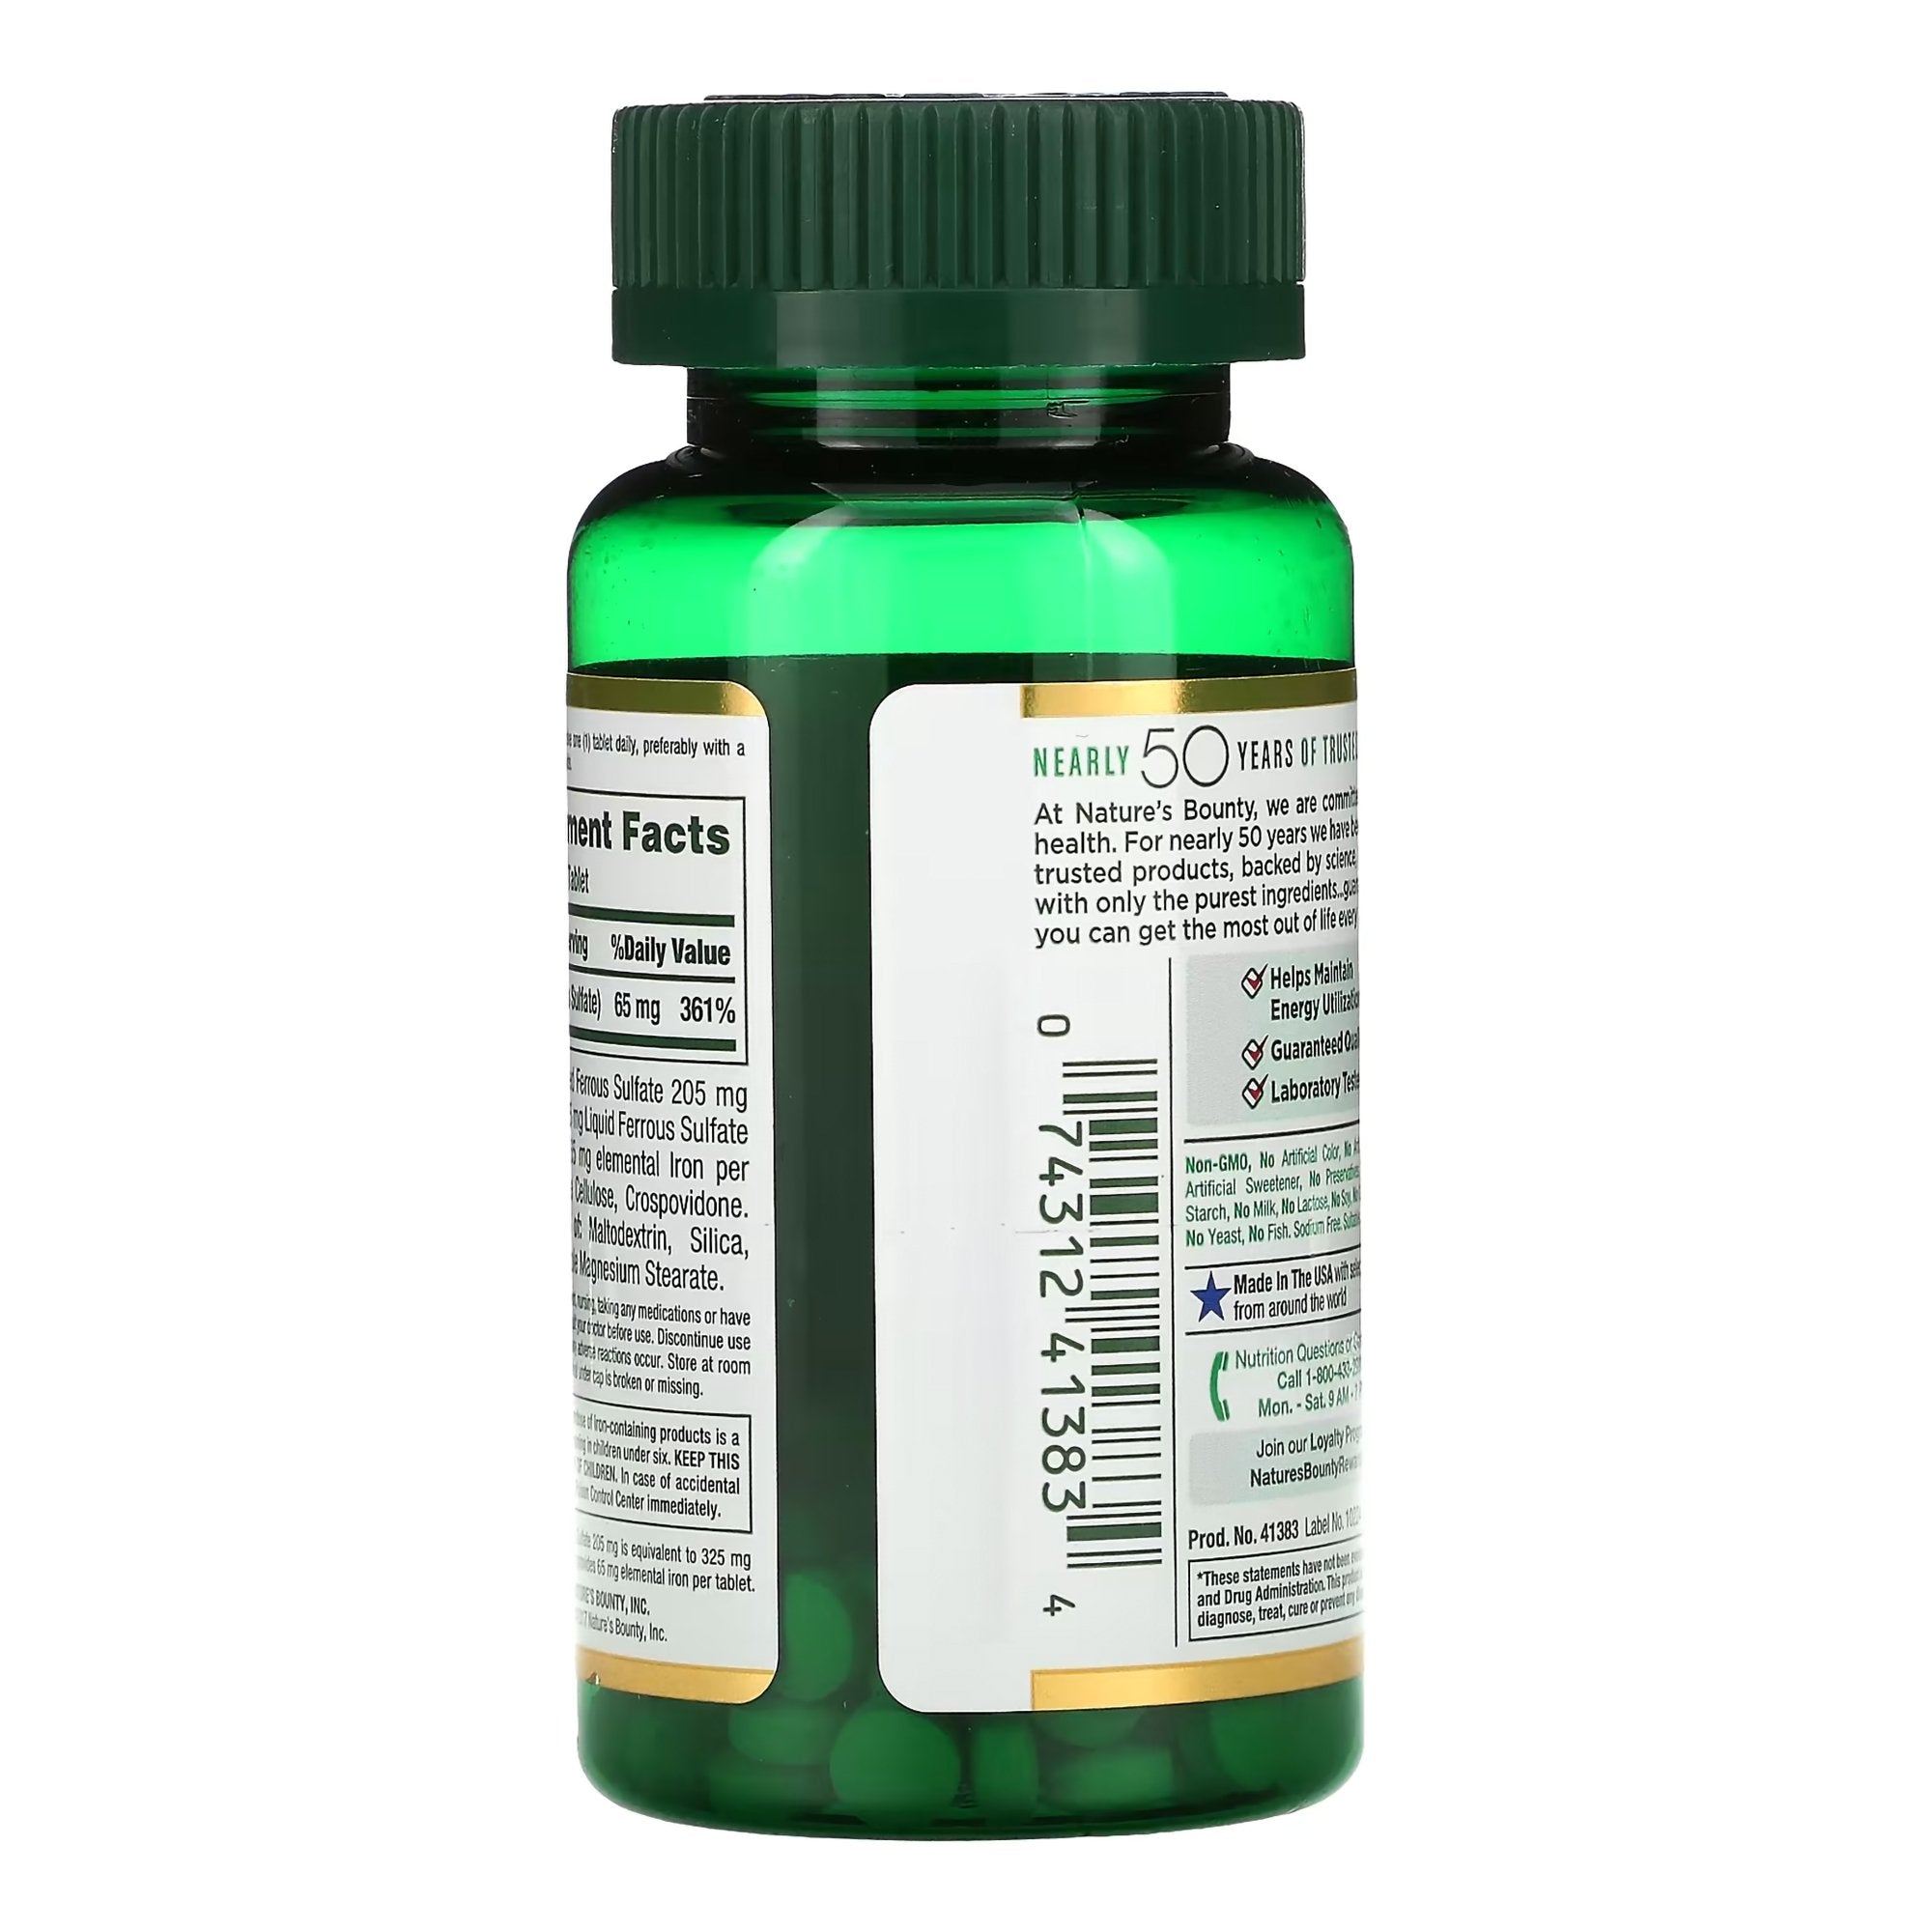 Mineral Supplement Nature's Bounty Iron 65 mg Strength Tablet 100 per Bottle